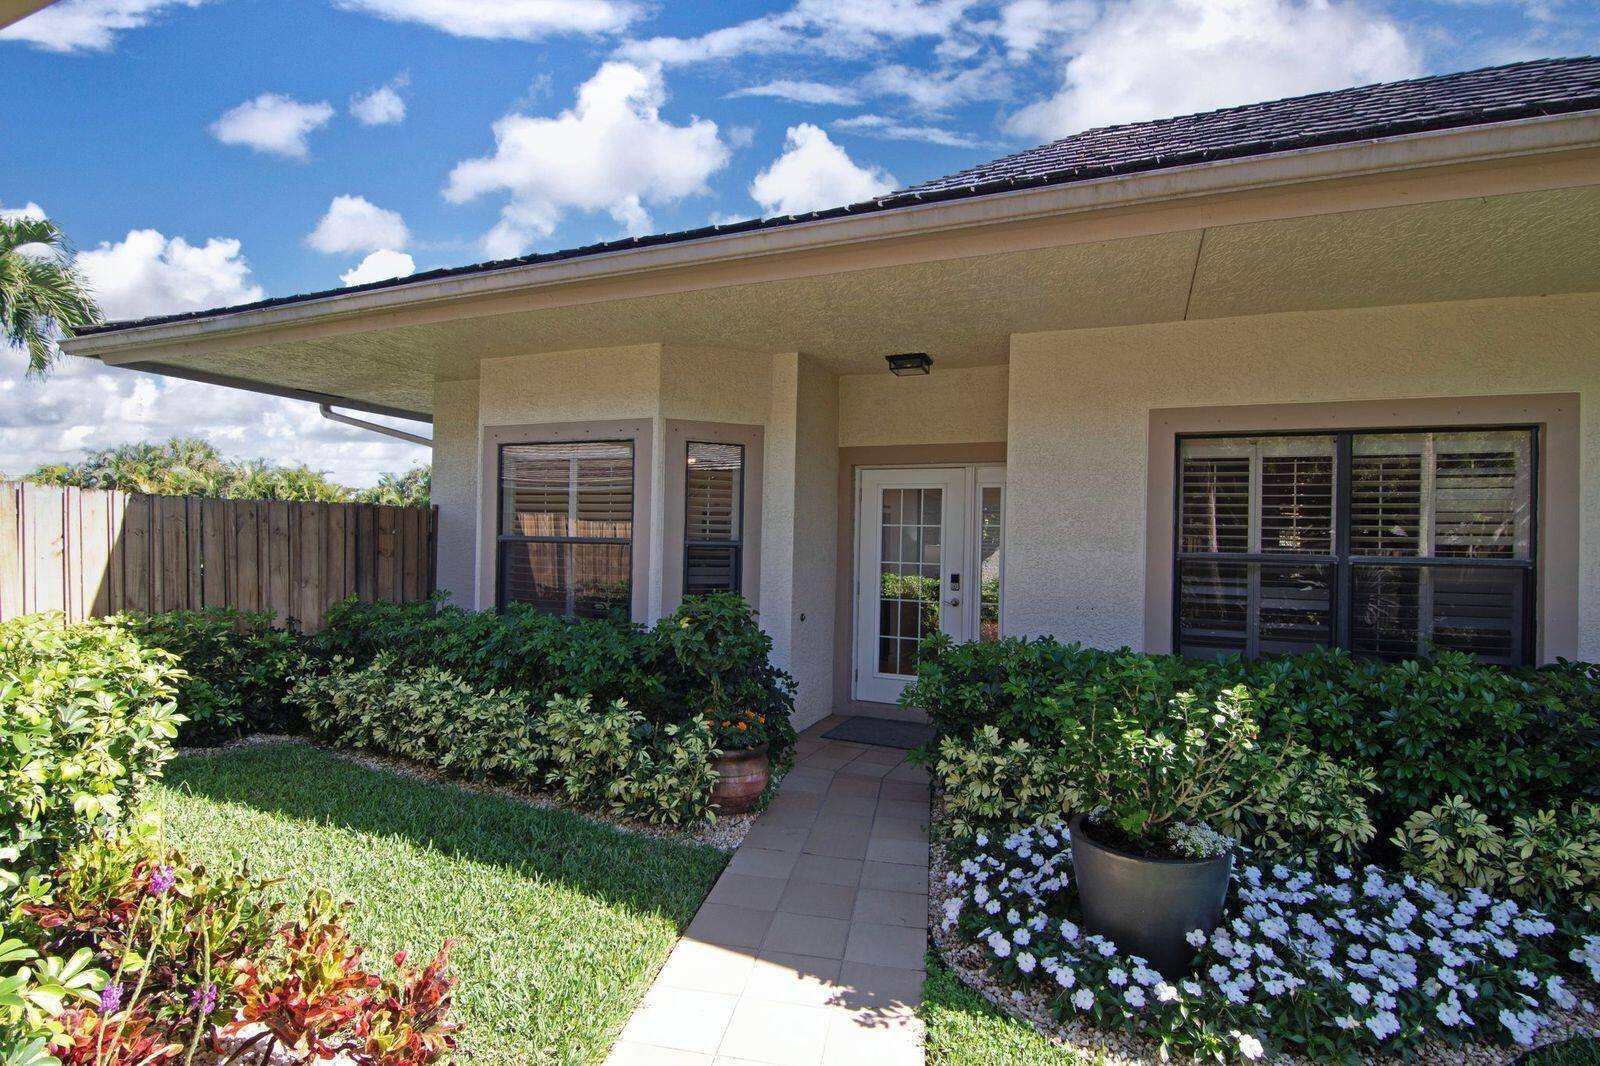 Fabulous BUNGALOW in Golf Tennis Village with 1 CAR GARAGE, PRIVATE FENCED in Beautiful LANSCAPED COURTYARD.